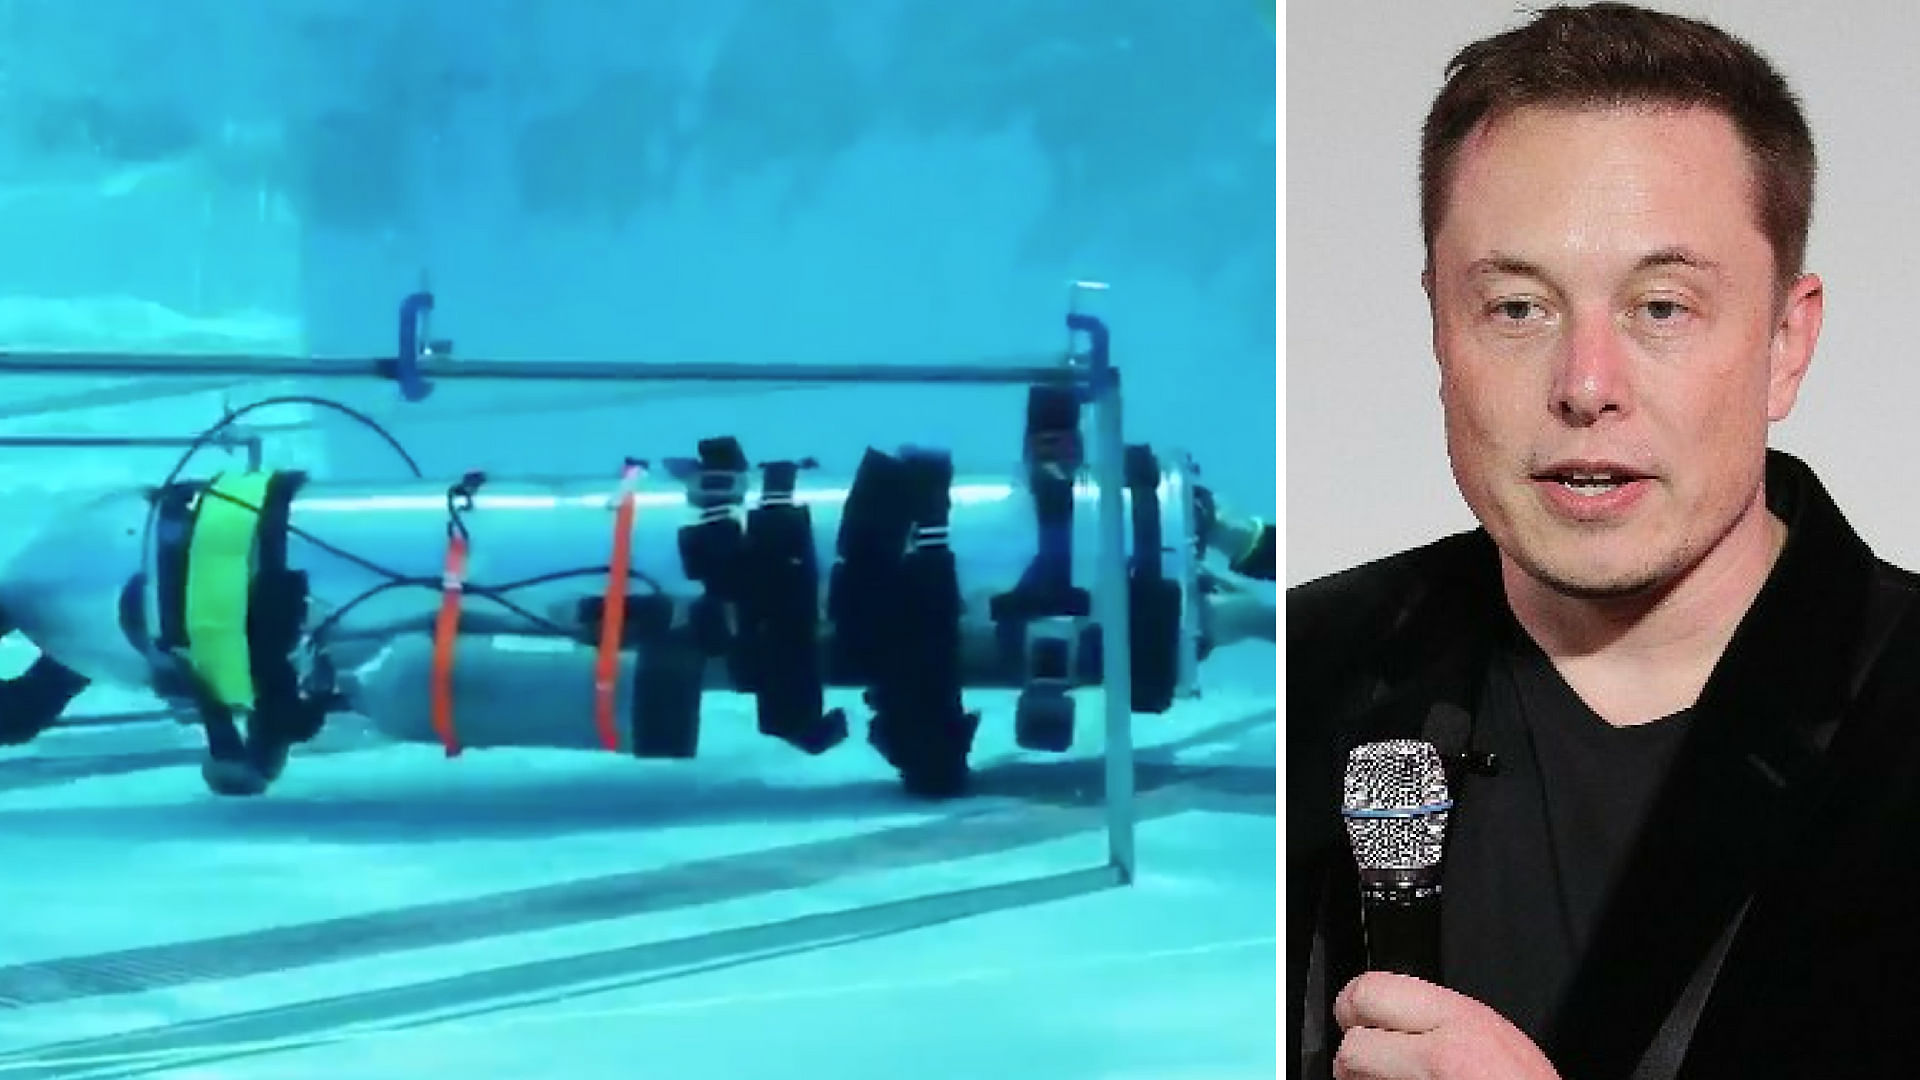 American space entrepreneur Elon Musk tweeted that he was in Thailand with a prototype mini-sub.